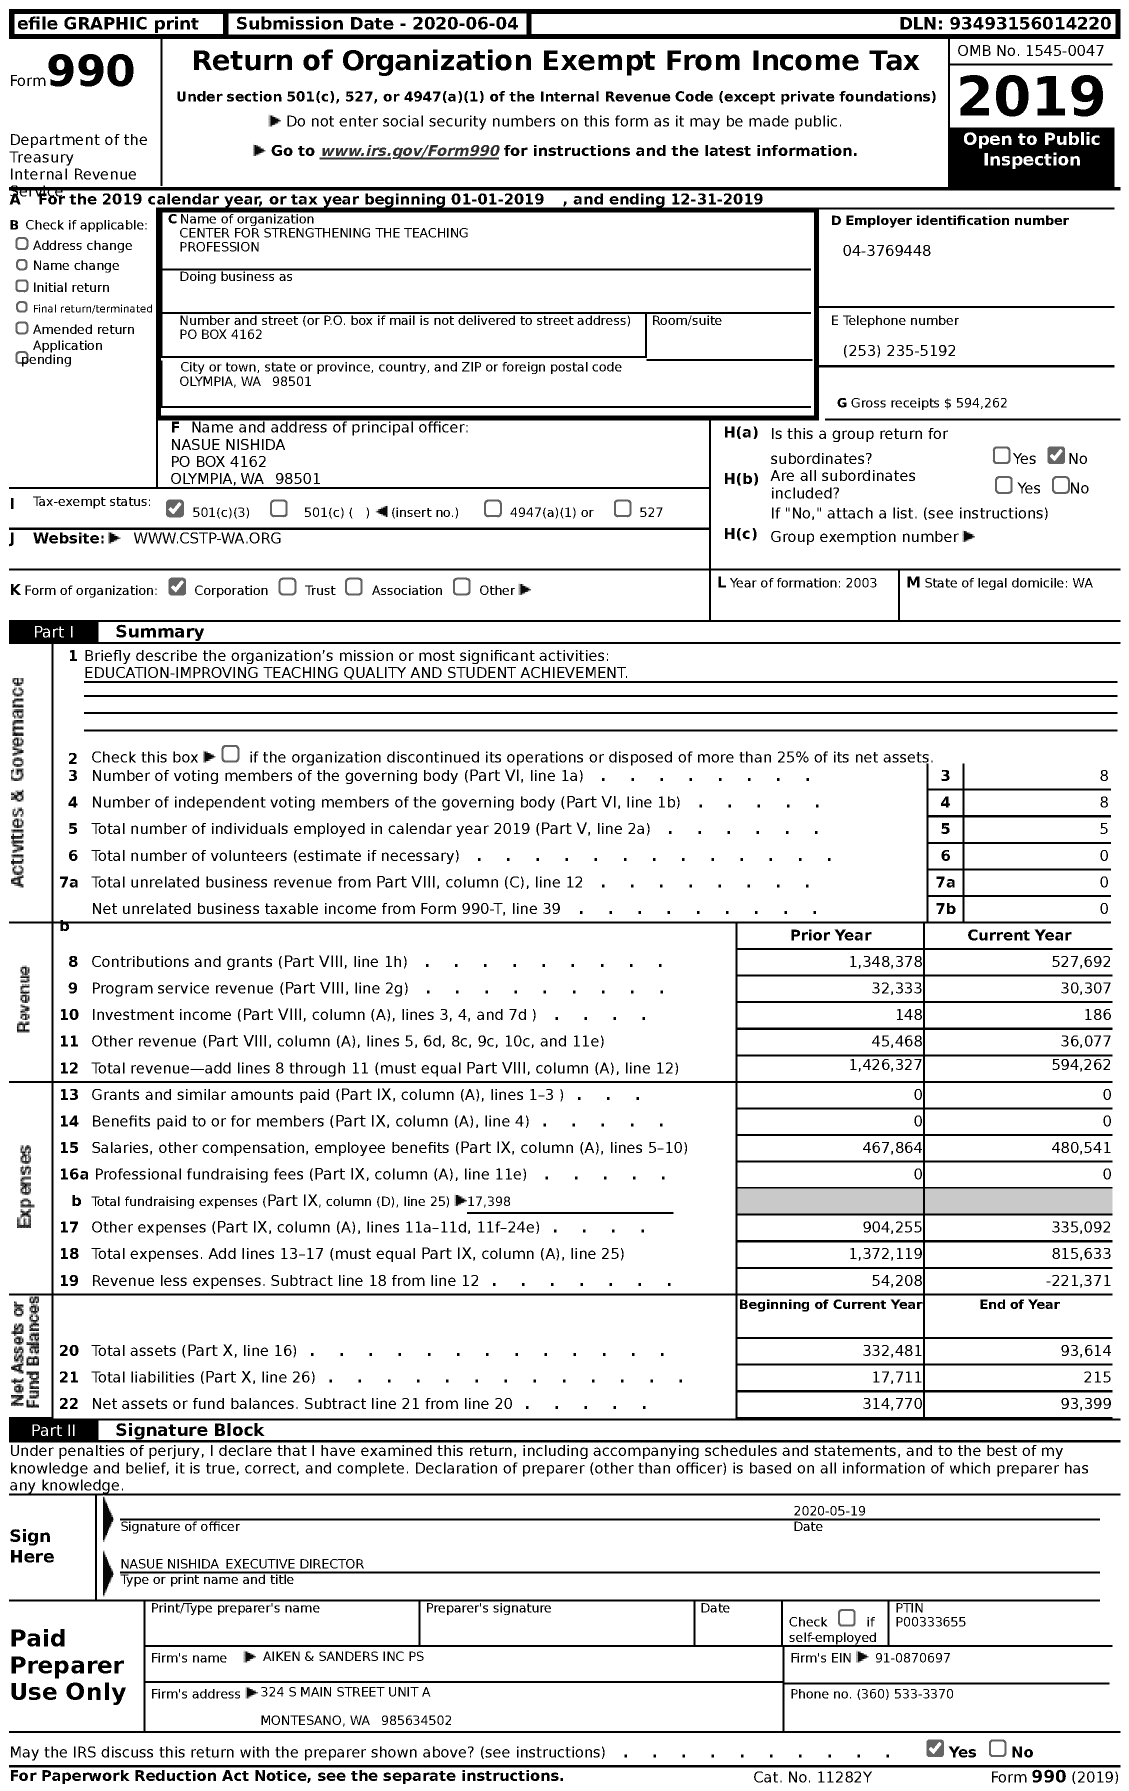 Image of first page of 2019 Form 990 for Center for Strengthening The Teaching Profession